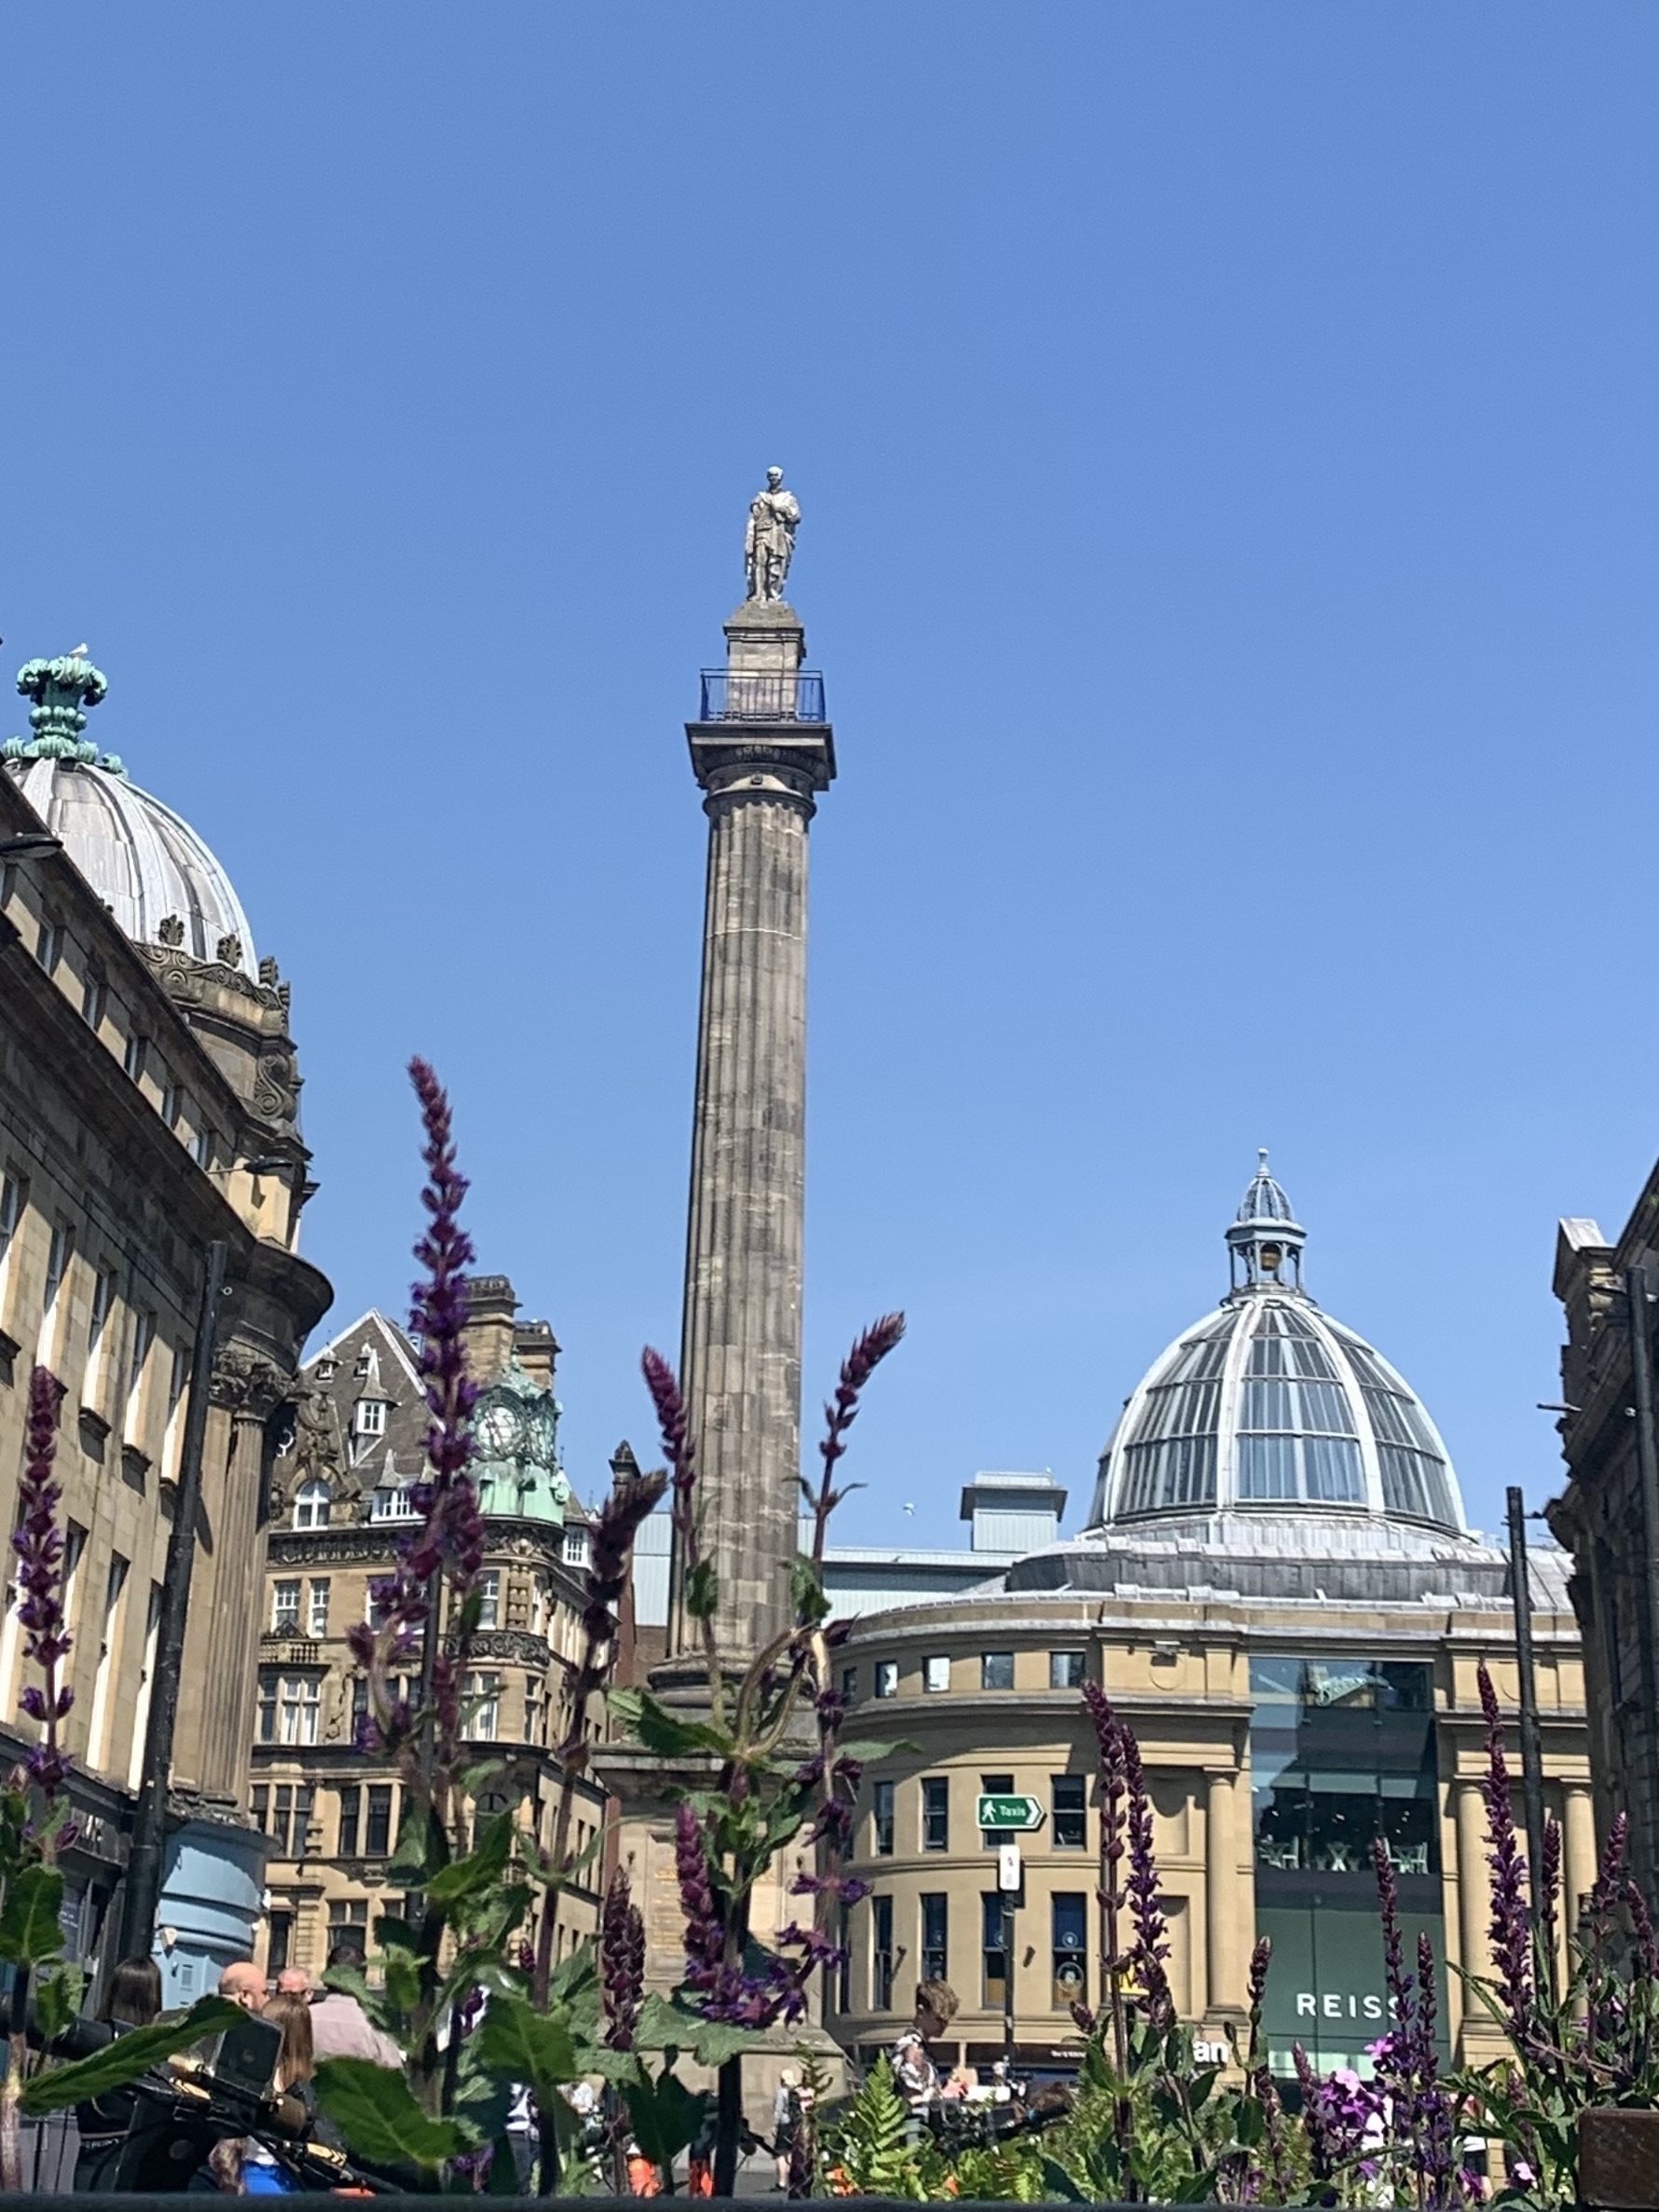 Purple flowers in the foreground, behind them is Grey’s Monument, a tall column with a statue of the 2nd Earl Grey at the top, and the buildings surrounding it in the centre of Newcastle-upon-Tyne, UK.